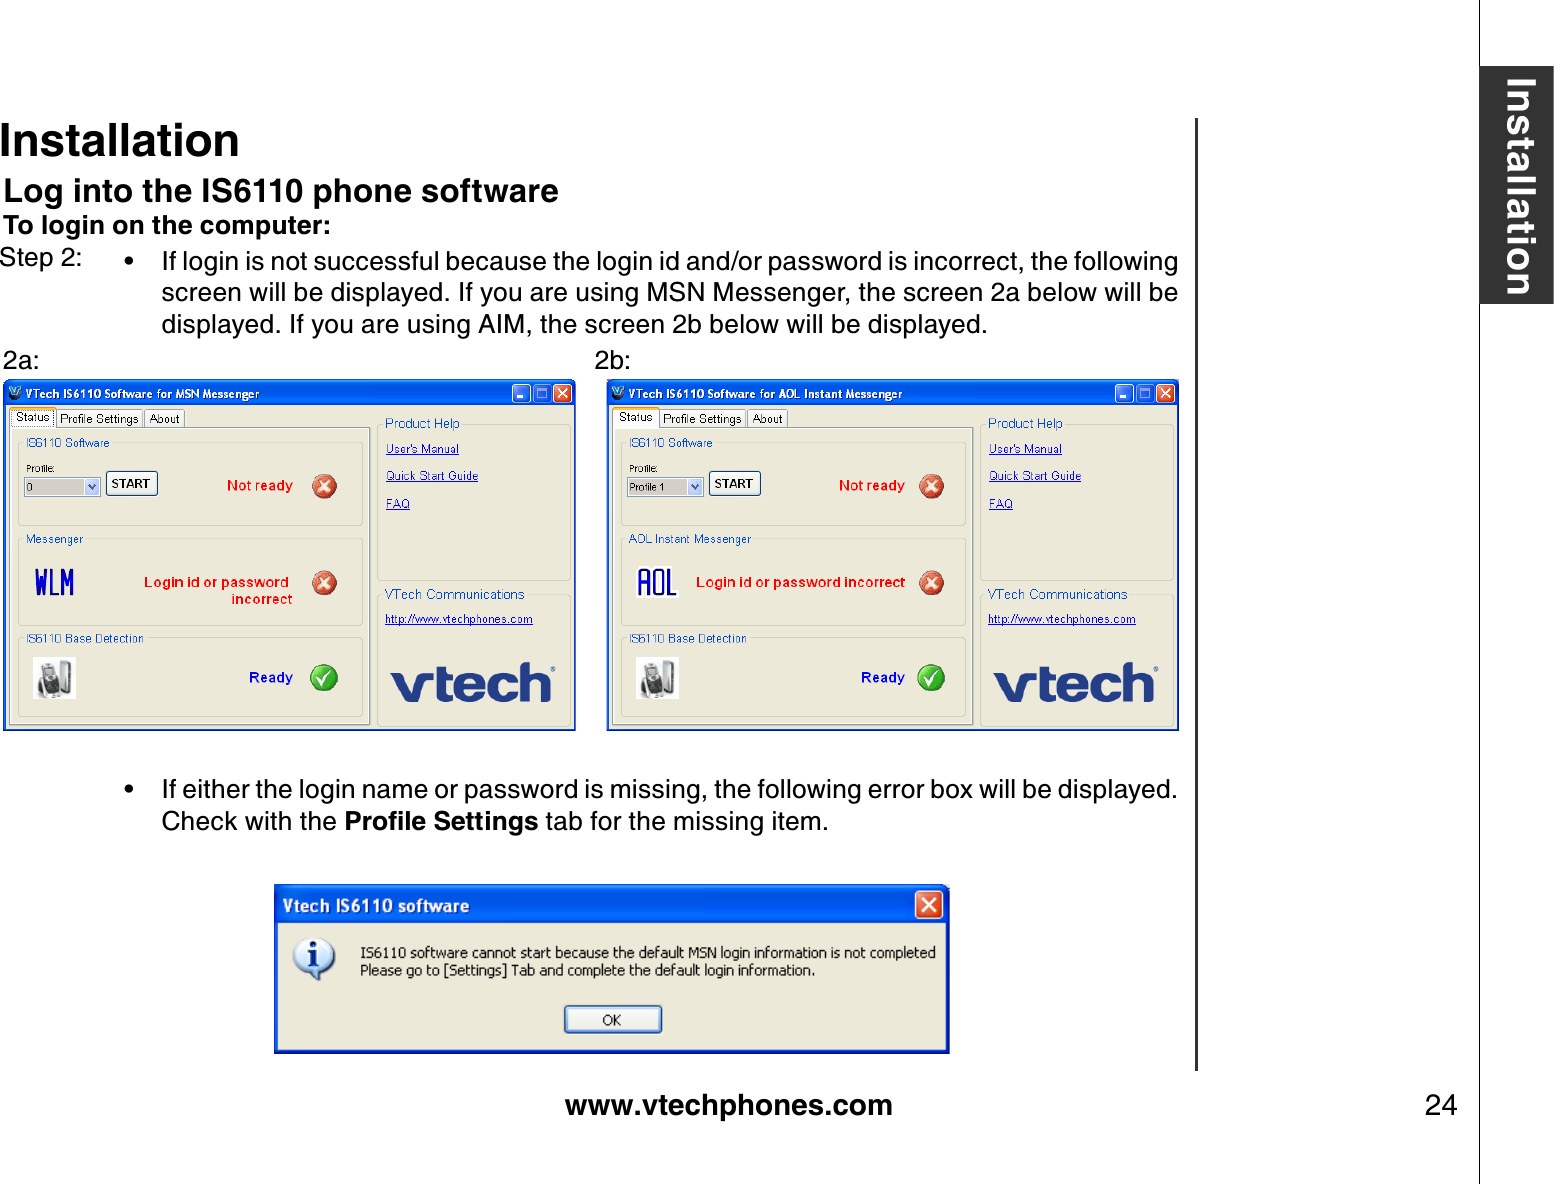 www.vtechphones.com 24InstallationLog into the IS6110 phone softwareTo login on the computer:If login is not successful because the login id and/or password is incorrect, the following screen will be displayed. If you are using MSN Messenger, the screen 2a below will be displayed. If you are using AIM, the screen 2b below will be displayed.2a:            2b:     If either the login name or password is missing, the following error box will be displayed. Check with the 2TQſNG5GVVKPIU tab for the missing item.••Step 2:Installation